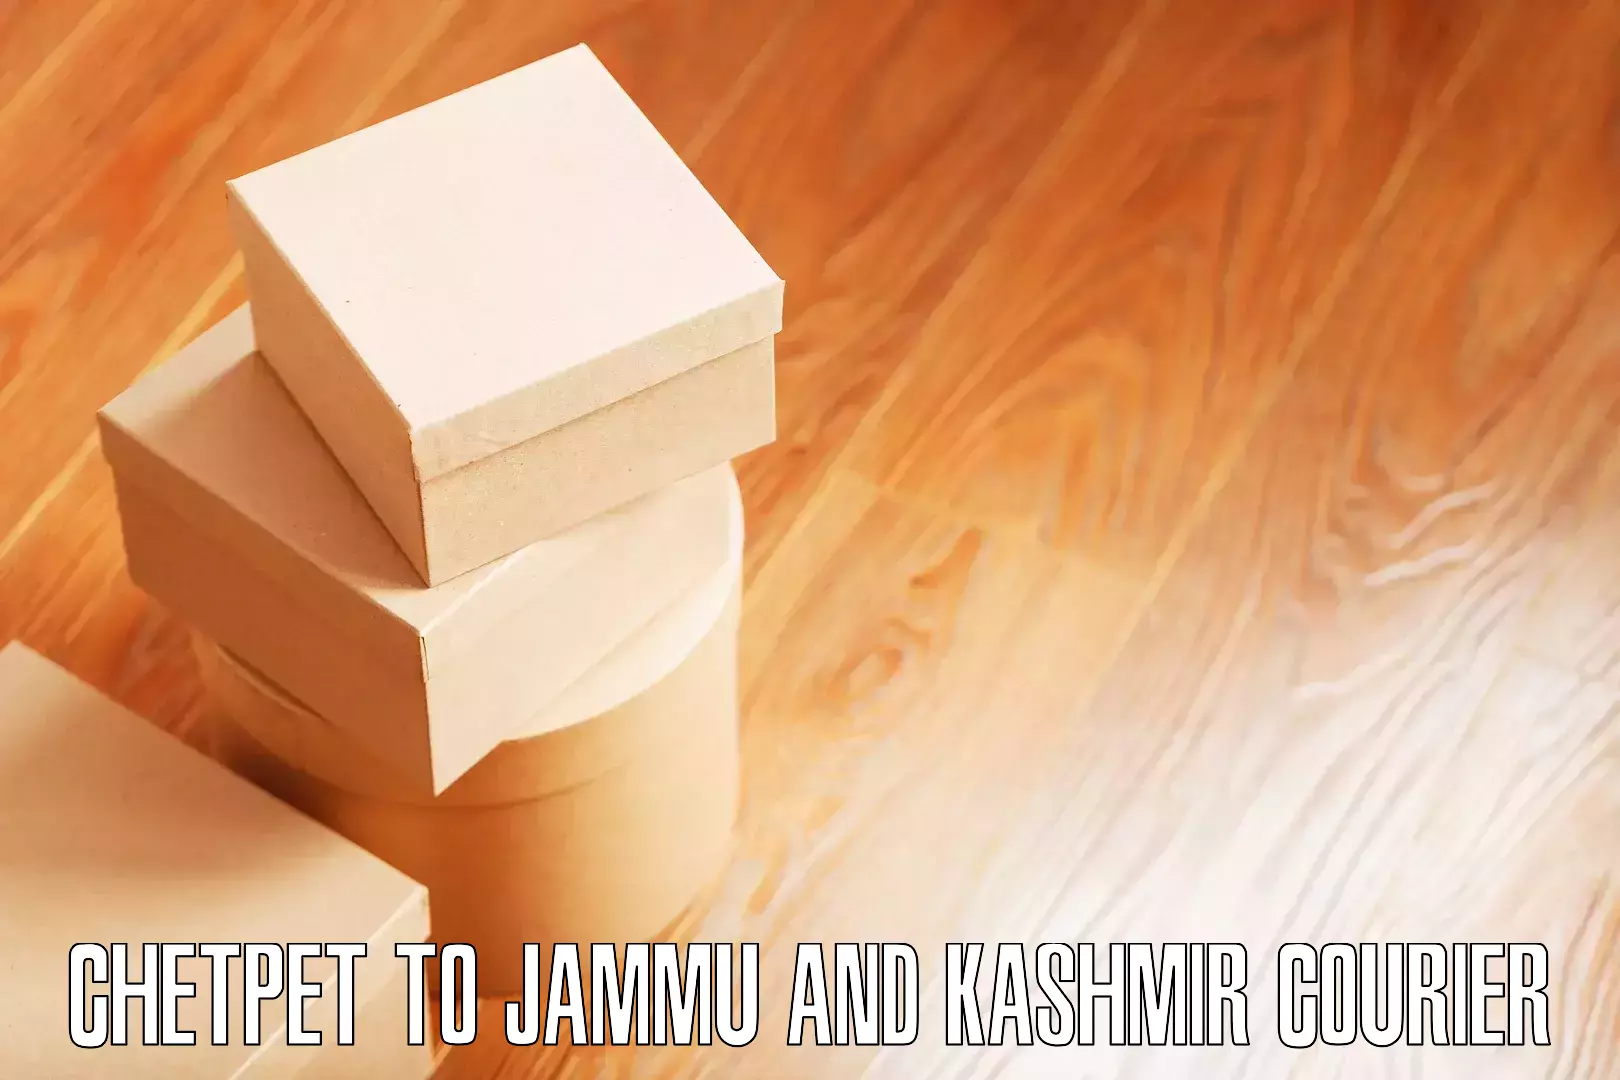 Home relocation experts Chetpet to Jammu and Kashmir